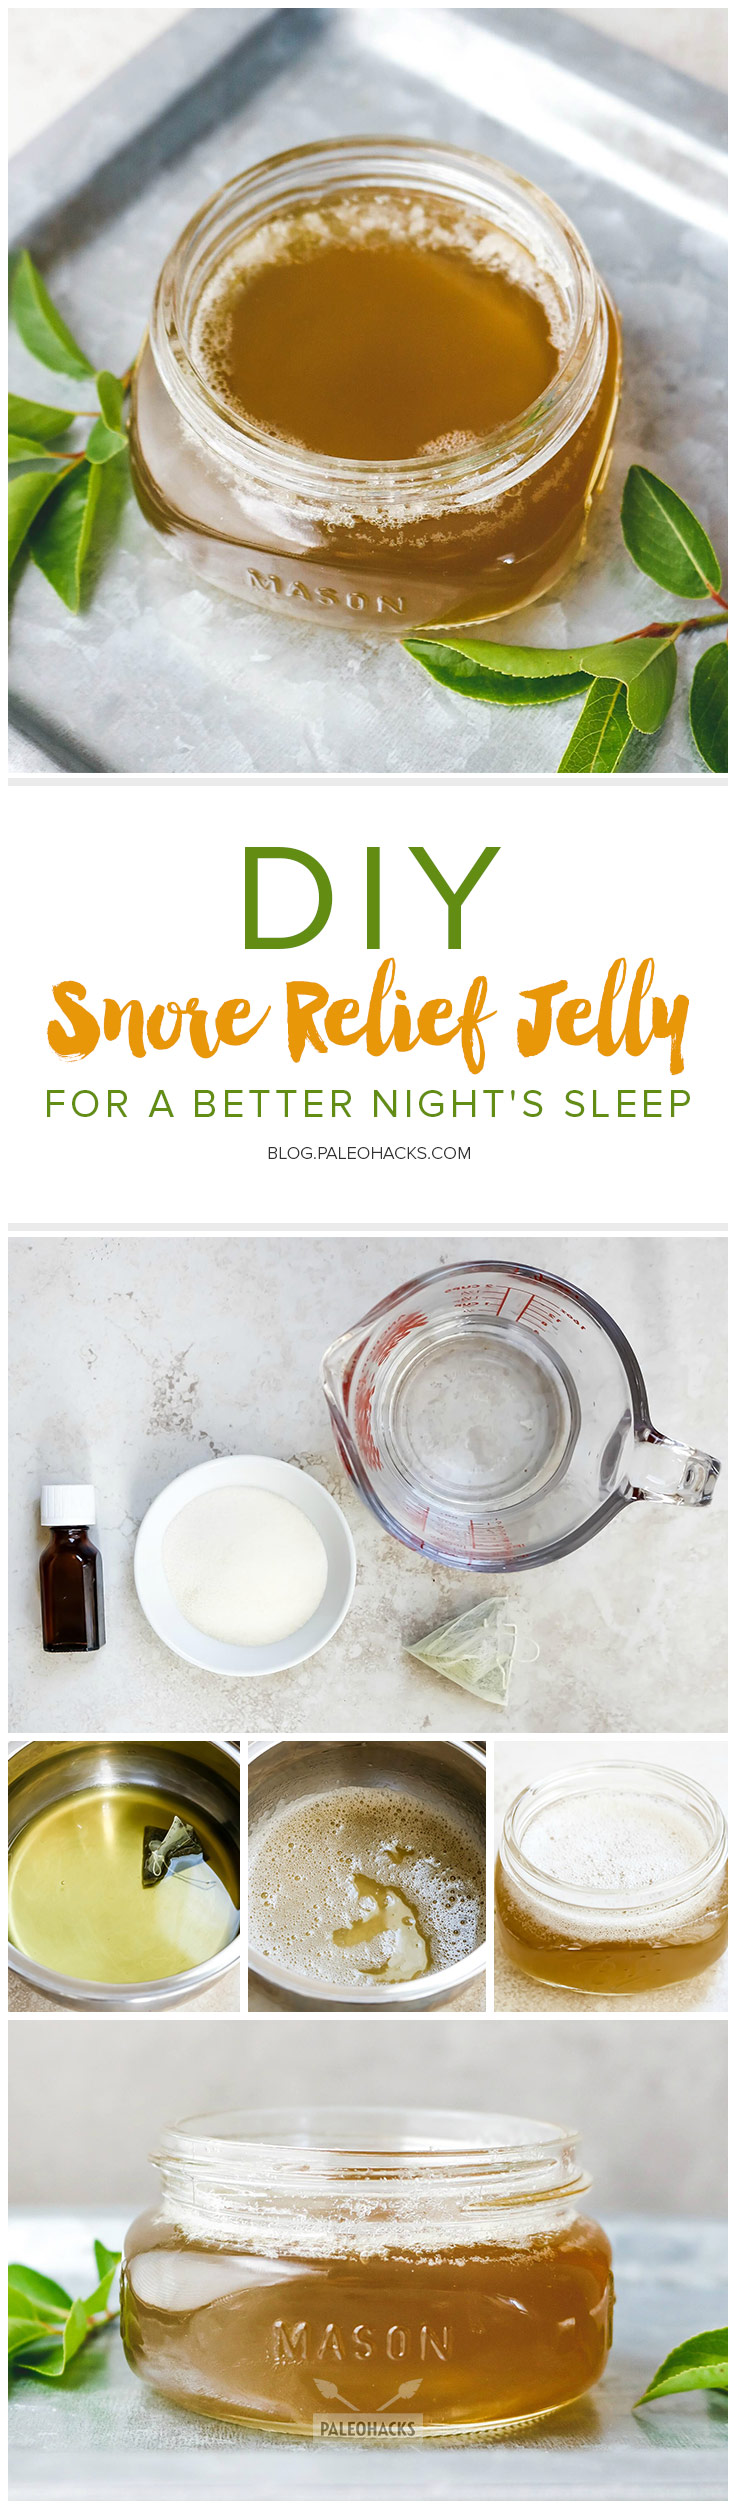 Keep this 4-ingredient Snore Relief Gel near your bedside to open up your sinuses and give you a better night’s sleep.